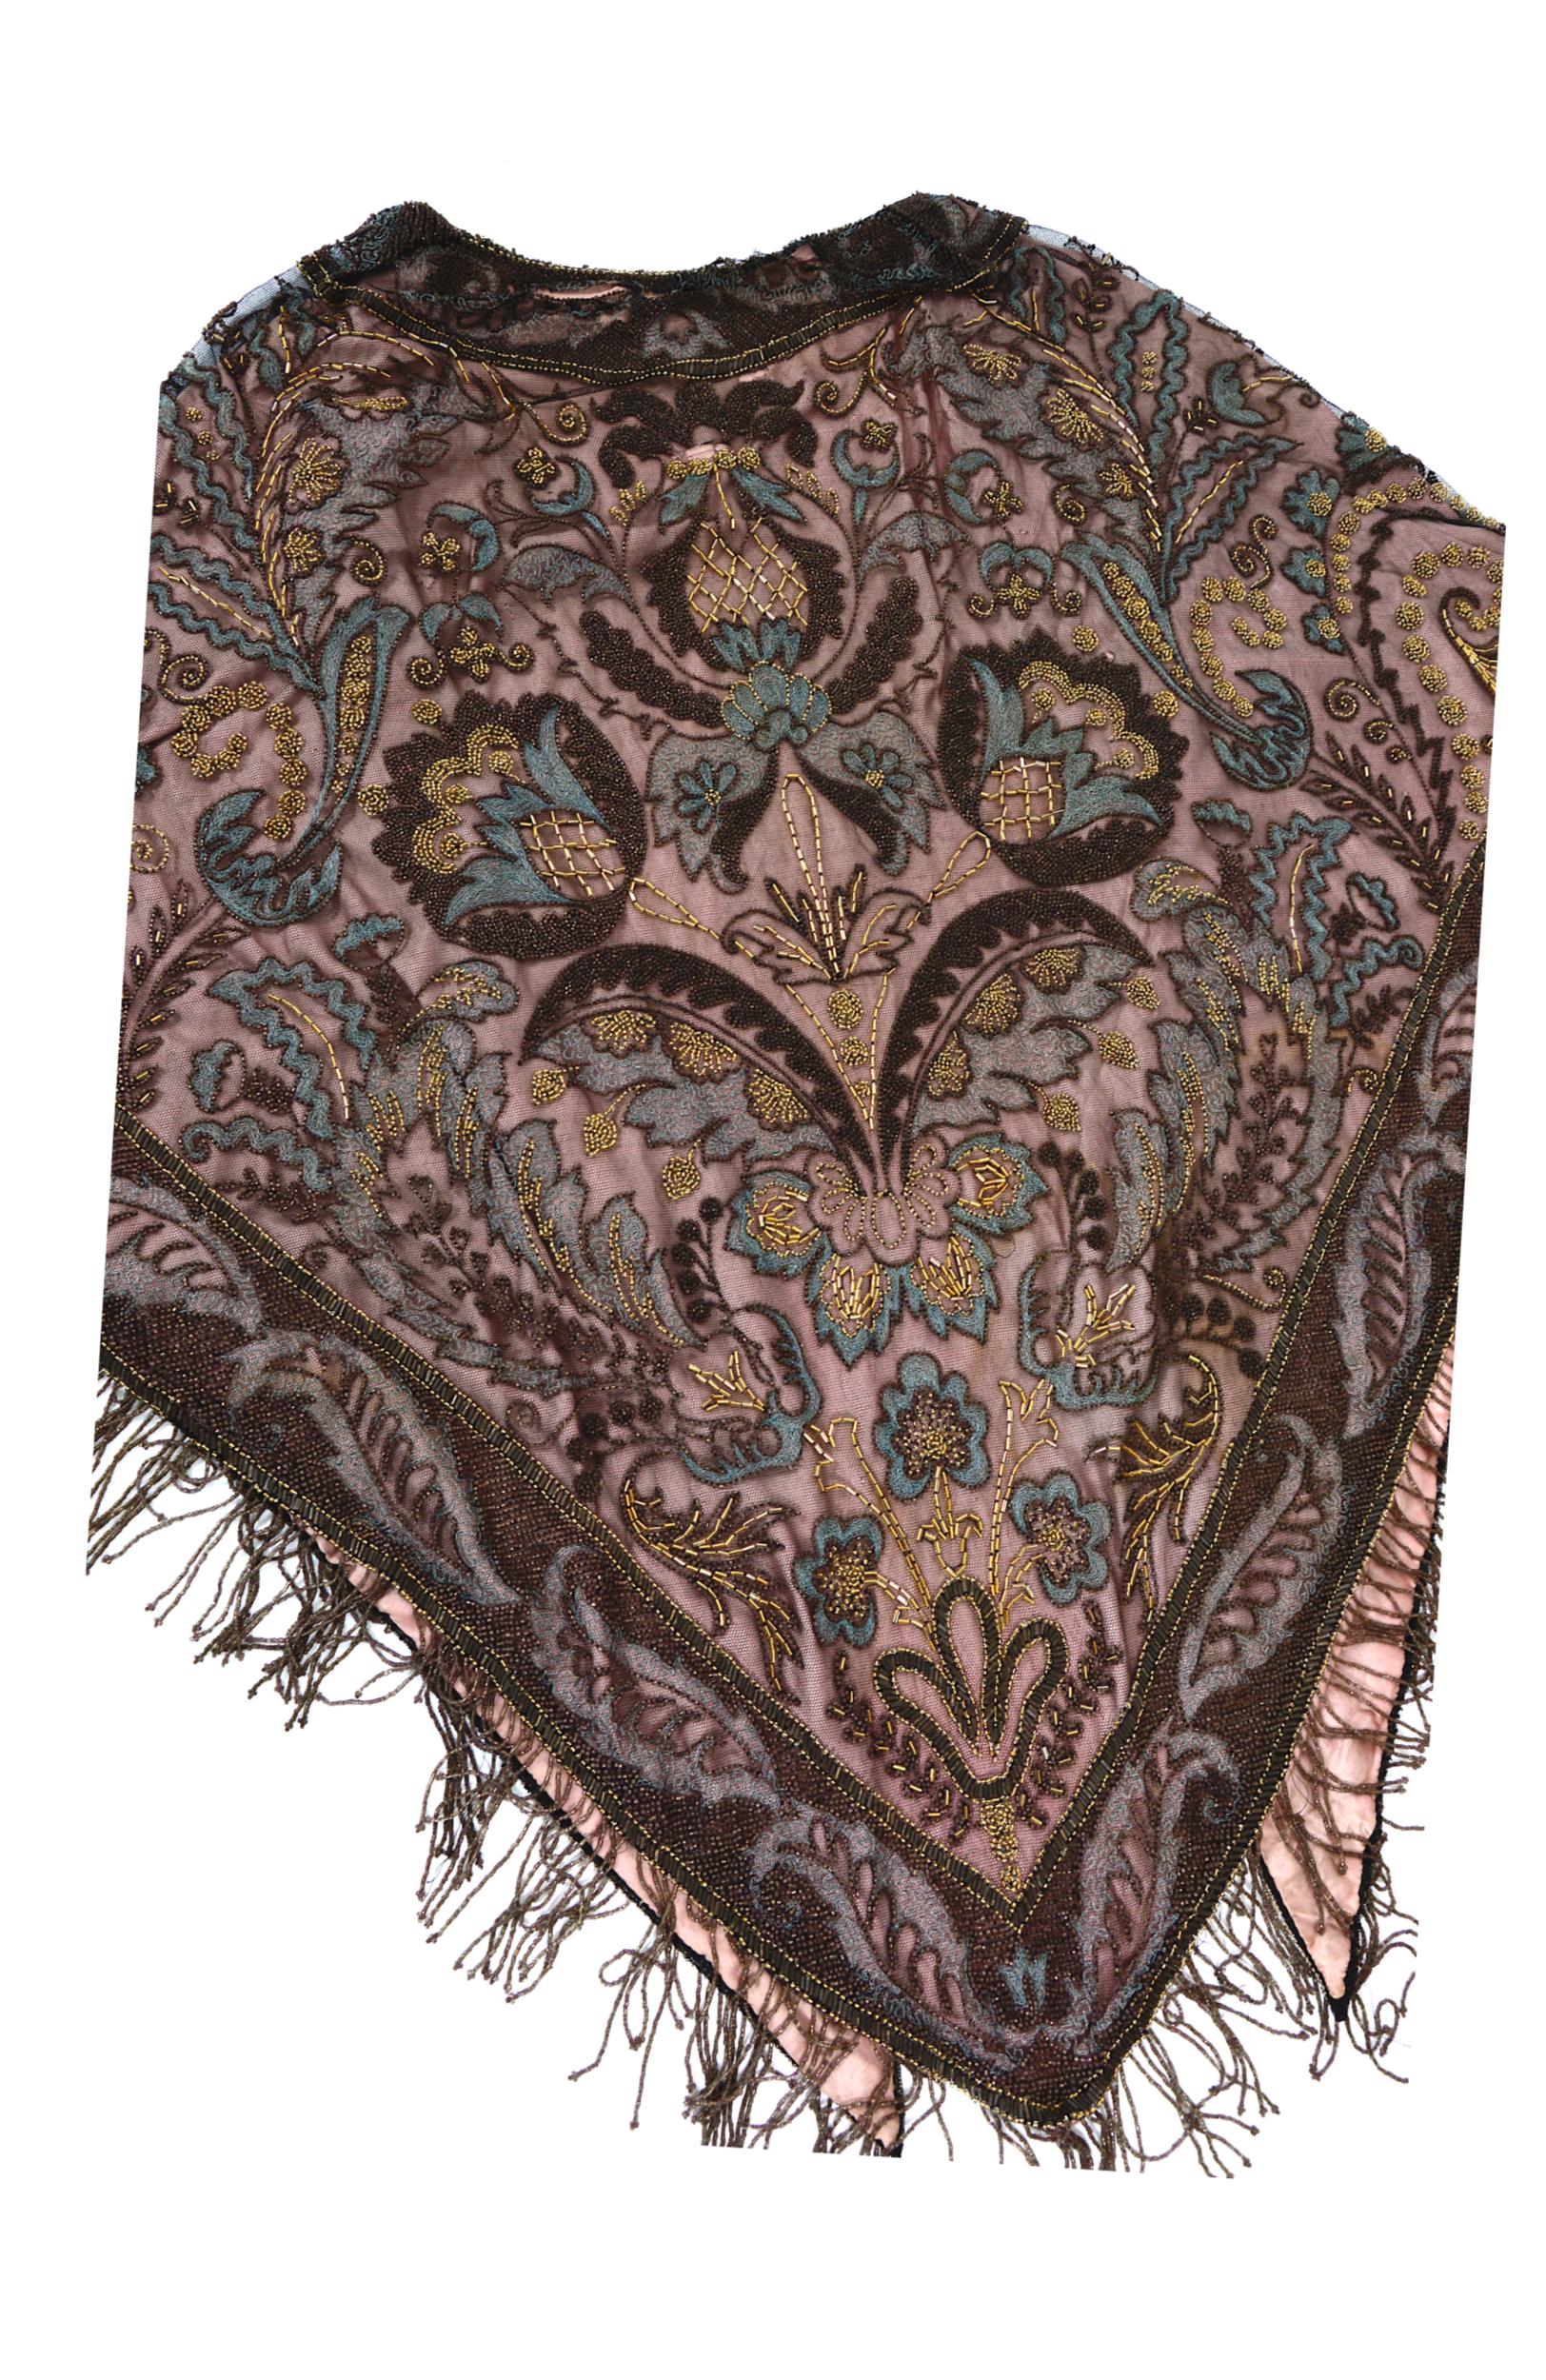 Liberty & Co London Paris art nouveau museum-worthy embellished beaded scarf  For Sale 3